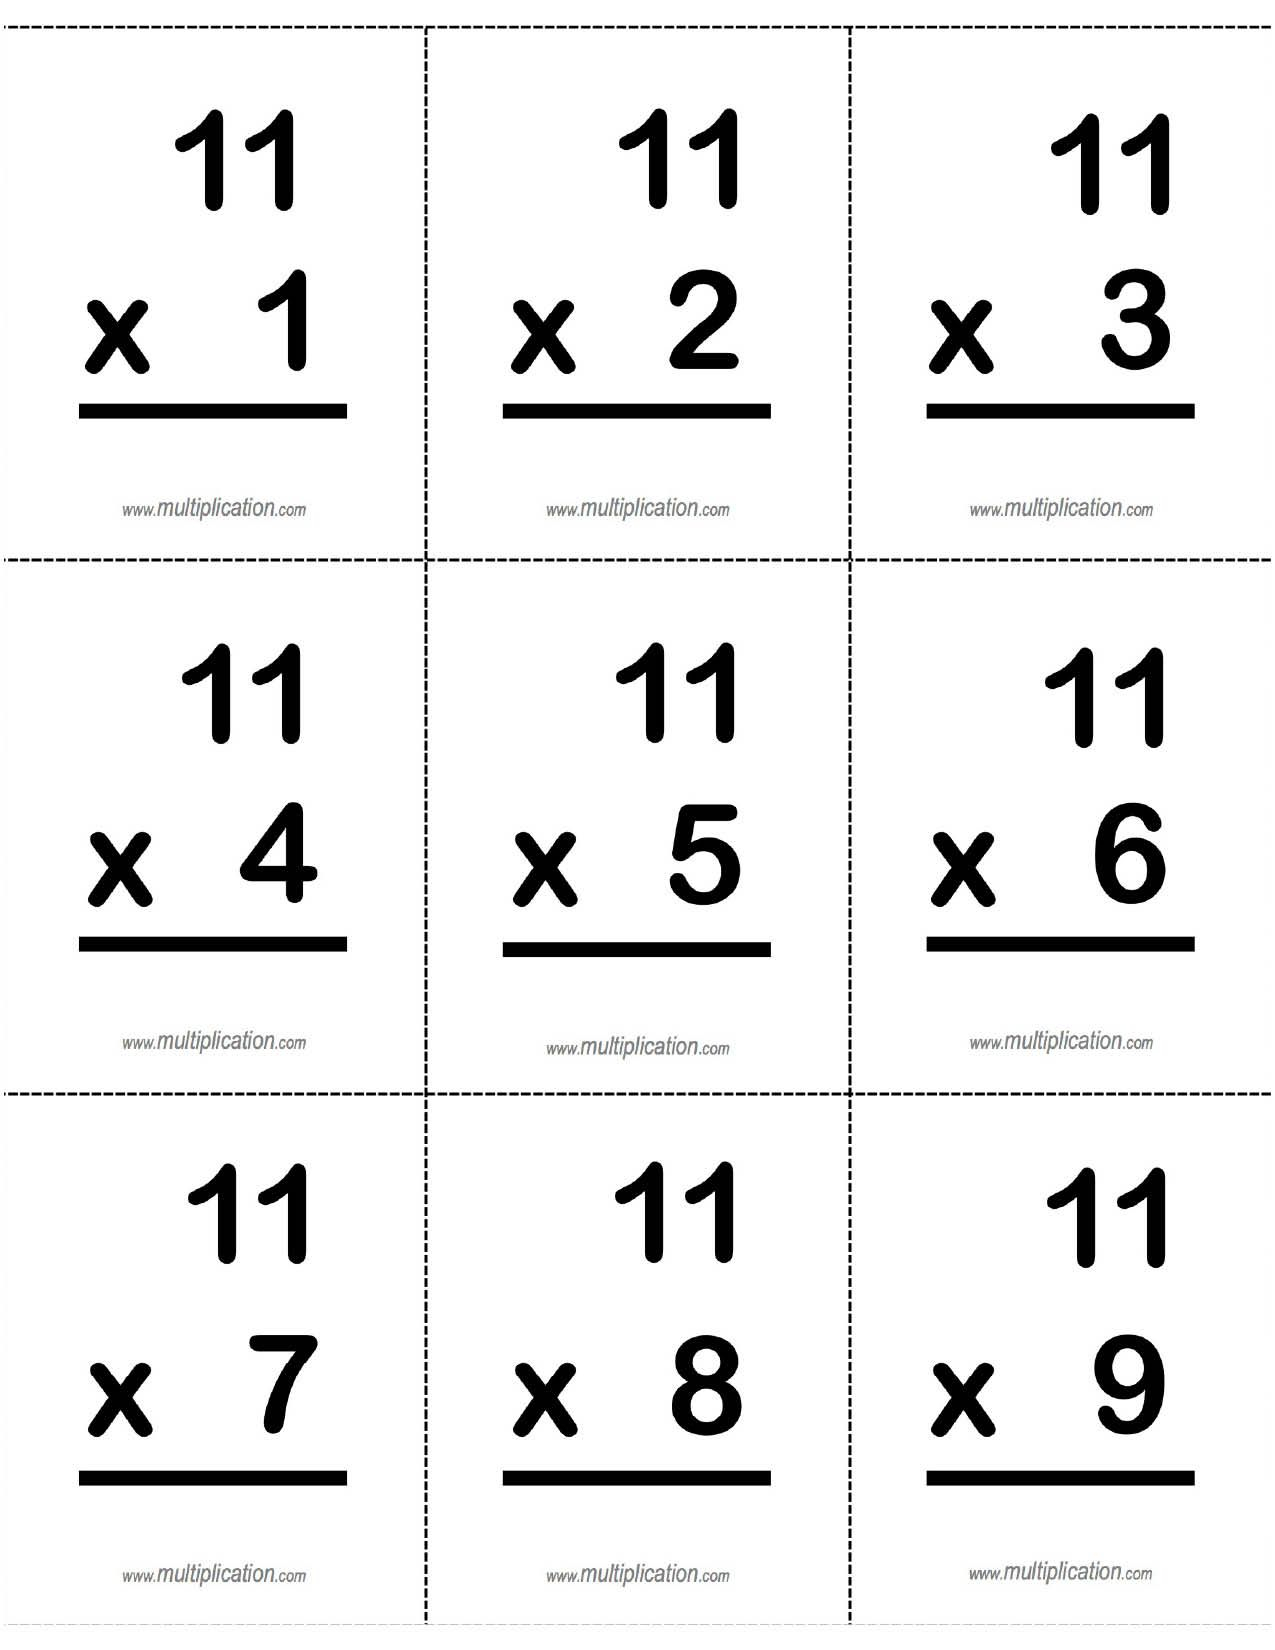 free-multiplication-flash-cards-printable-front-and-back